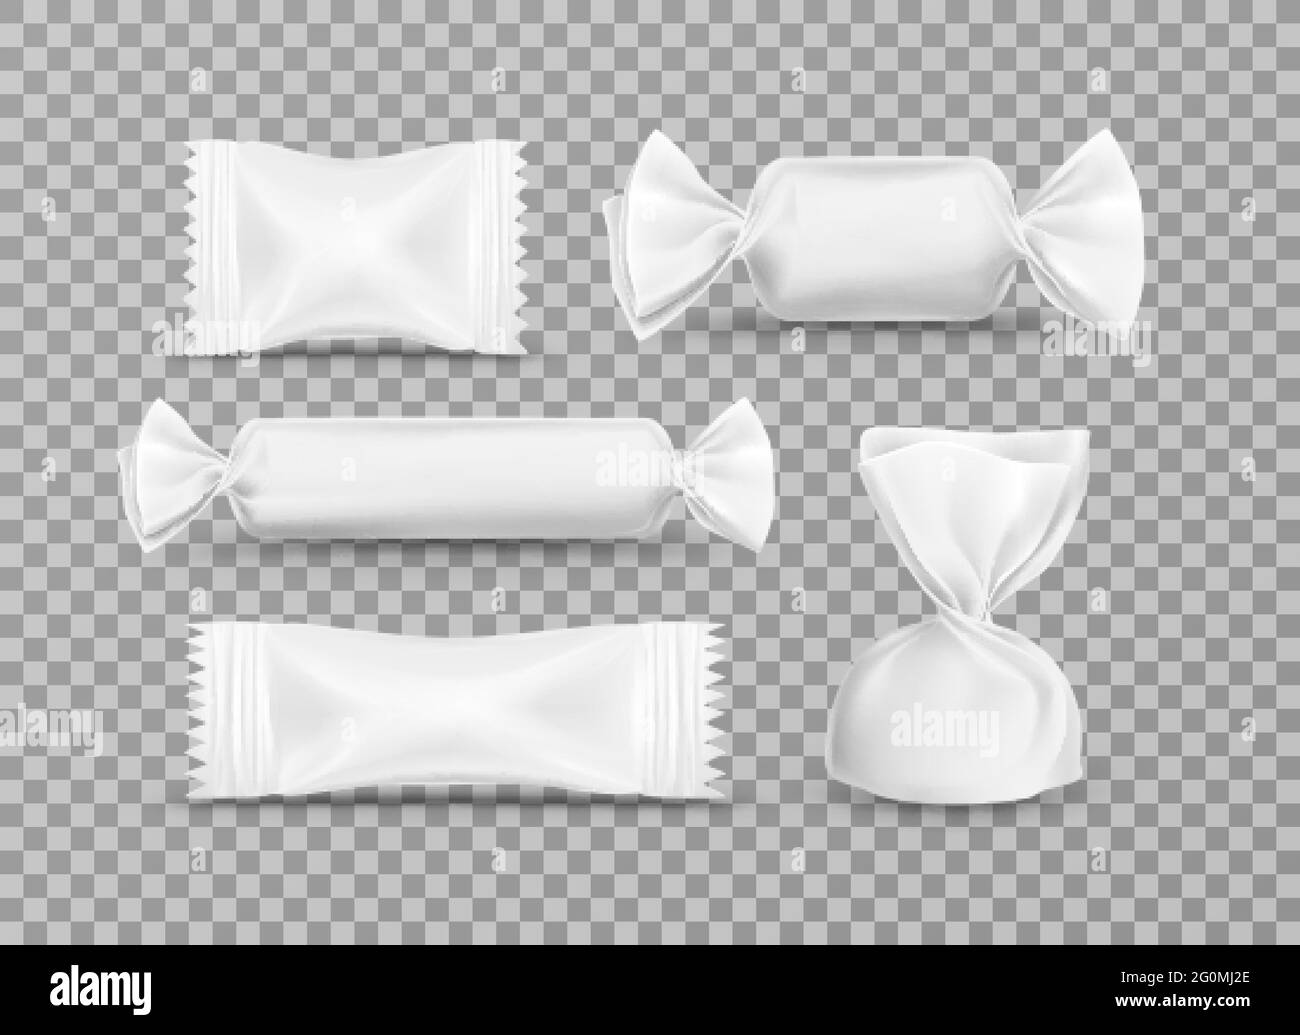 Vector realistic candy paper wrappers for brand ad design on transparent background. Set of illustrations of white glossy plastic packing for candies, chocolate, truffle and pouch sweets production. Stock Vector